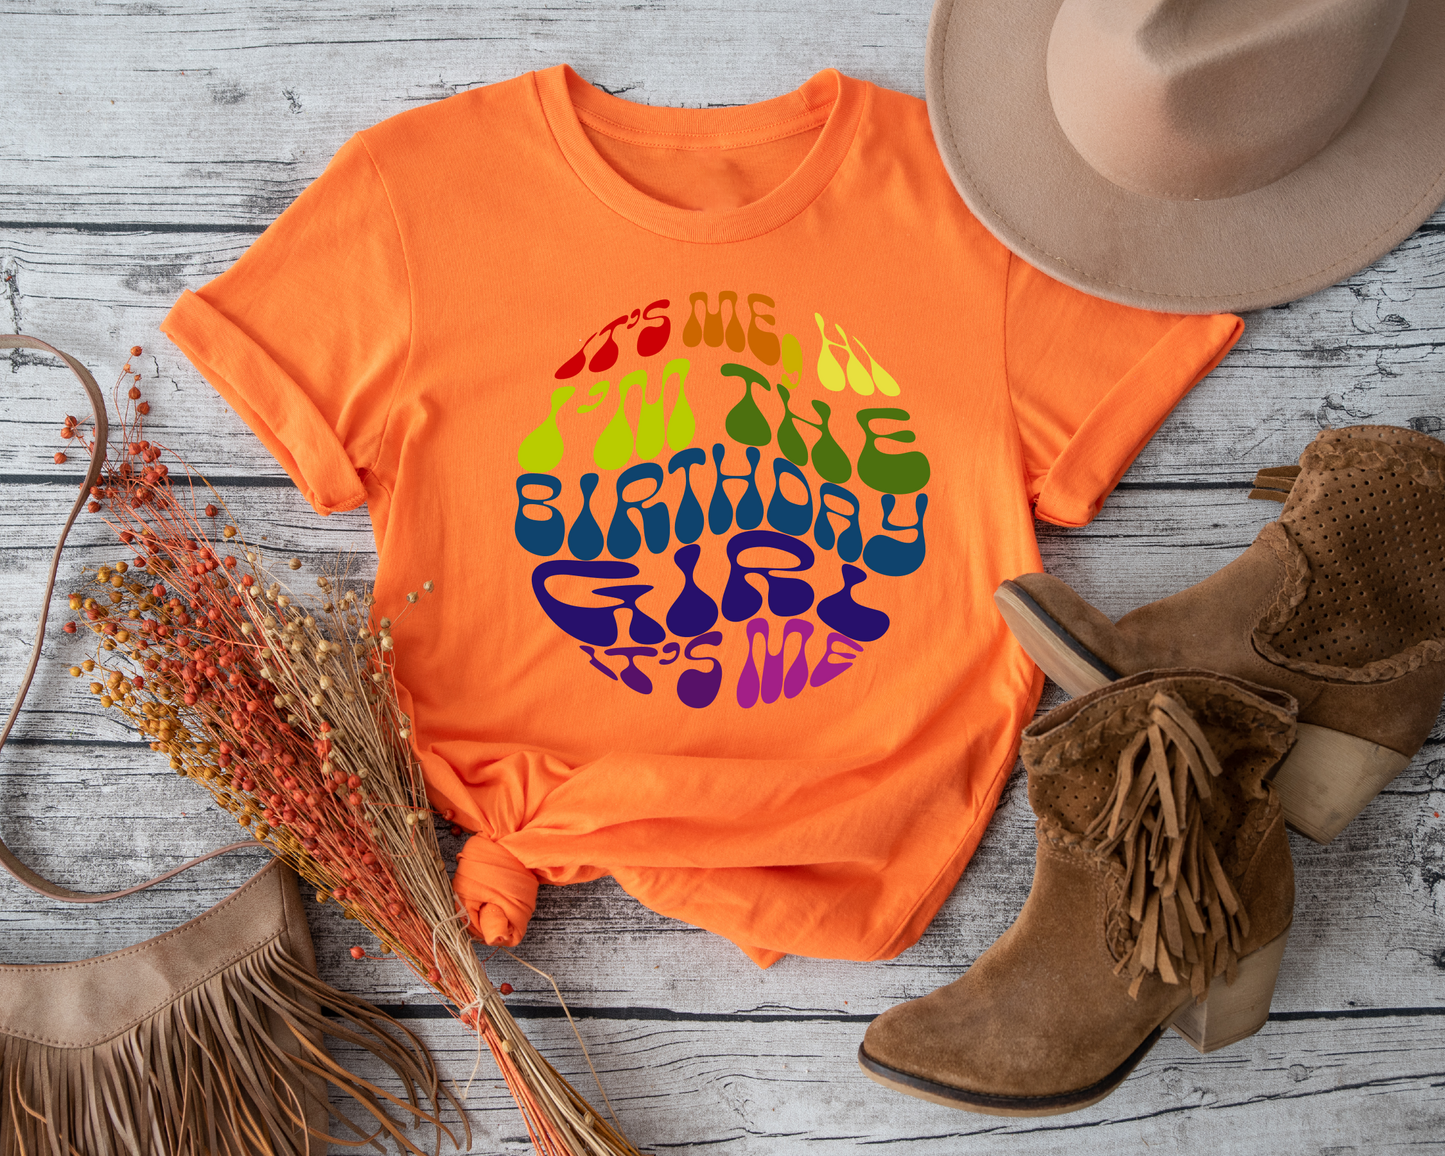 This adorable tee is the perfect outfit for a fun and memorable birthday celebration